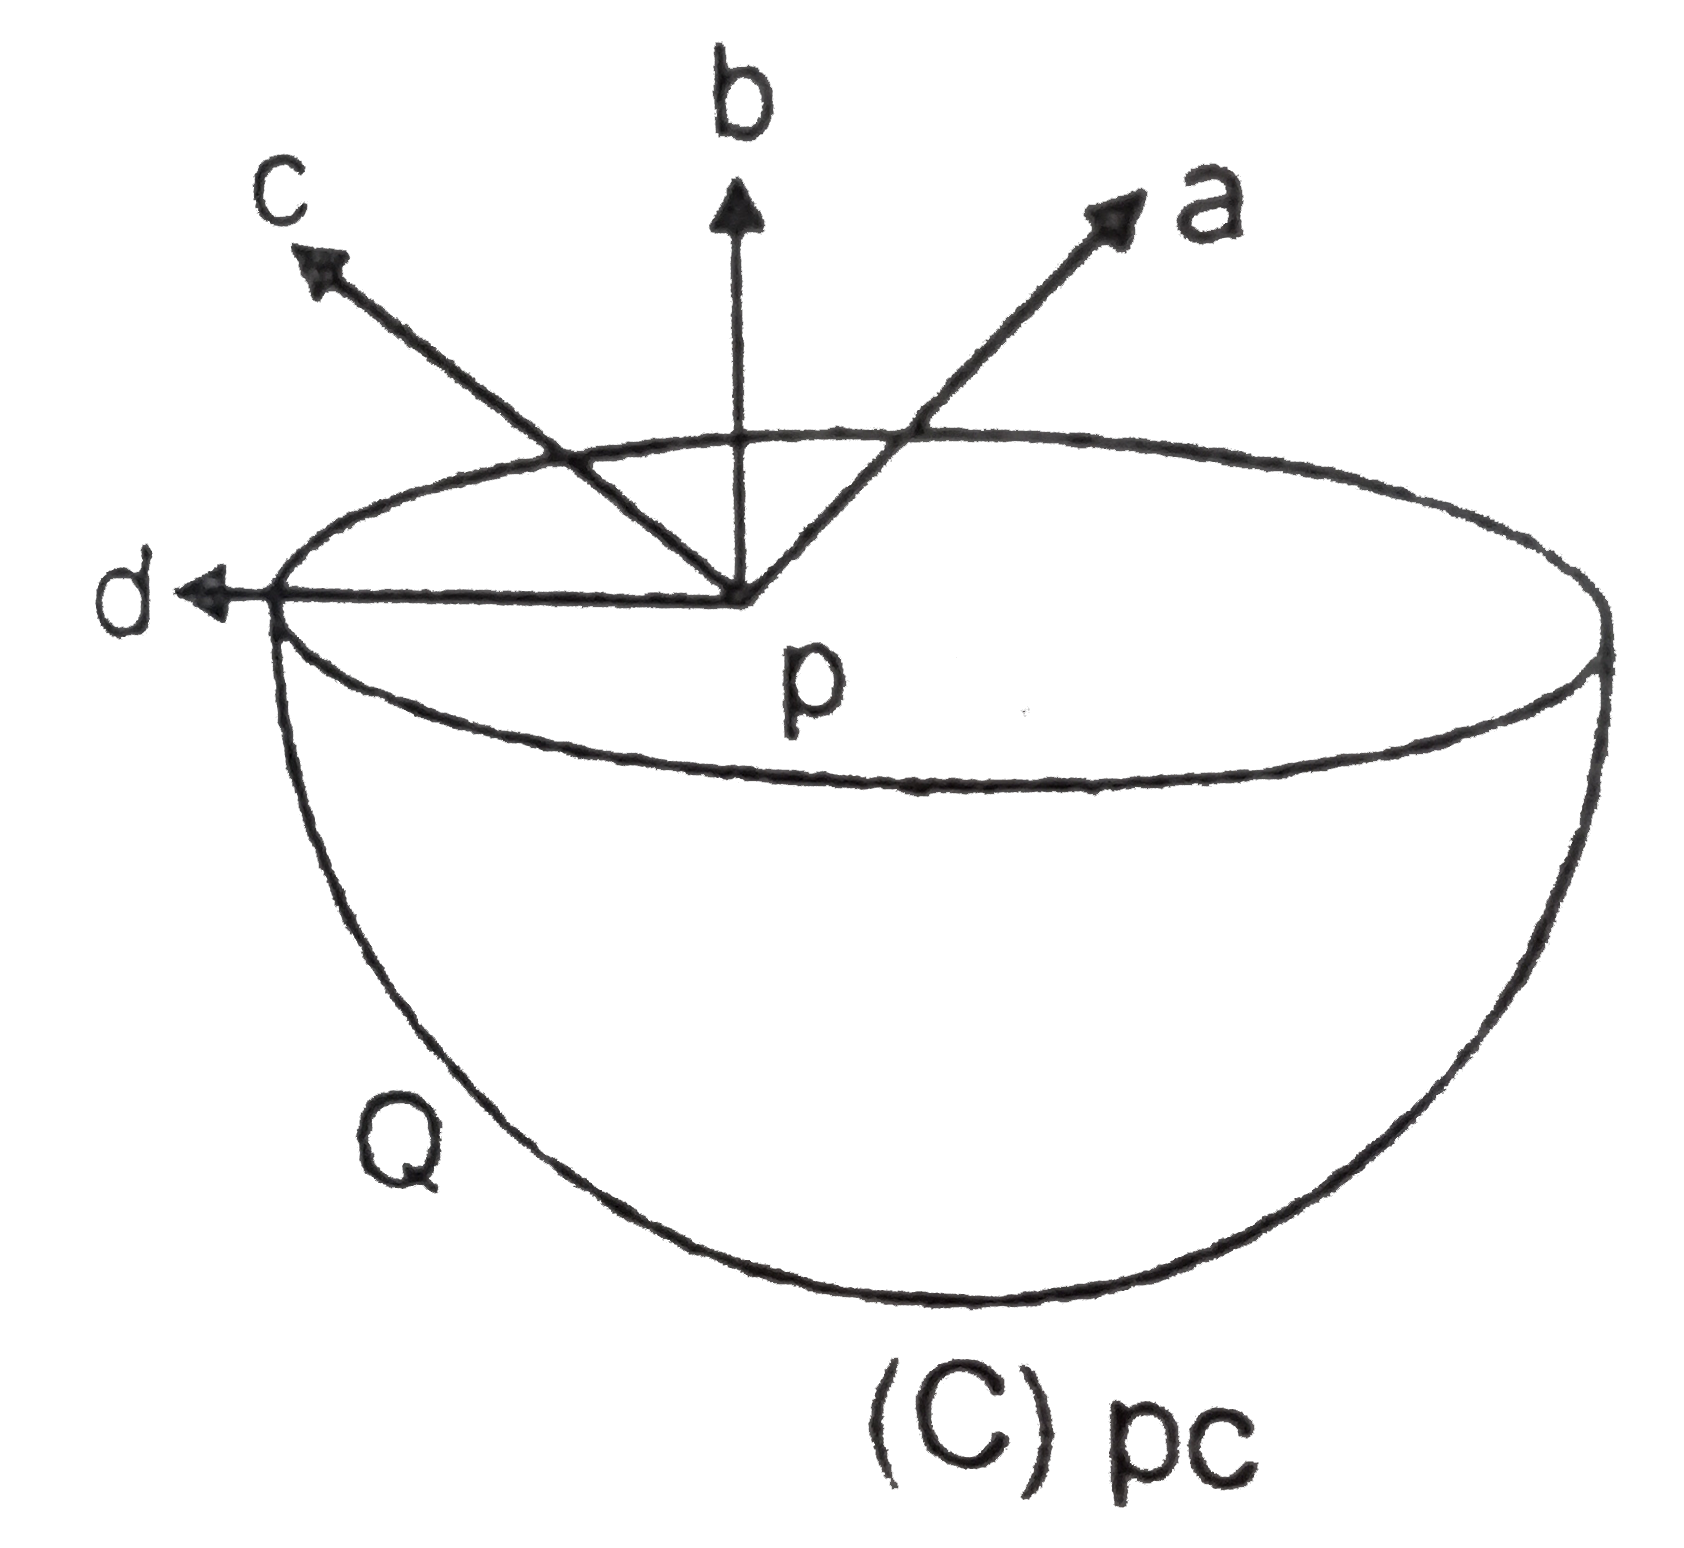 Figure shows a uniformly charges hemispherical shell. The direction of electric field at point p that is off centre (but in the plane of the largest circle of the hemisphere), will be along